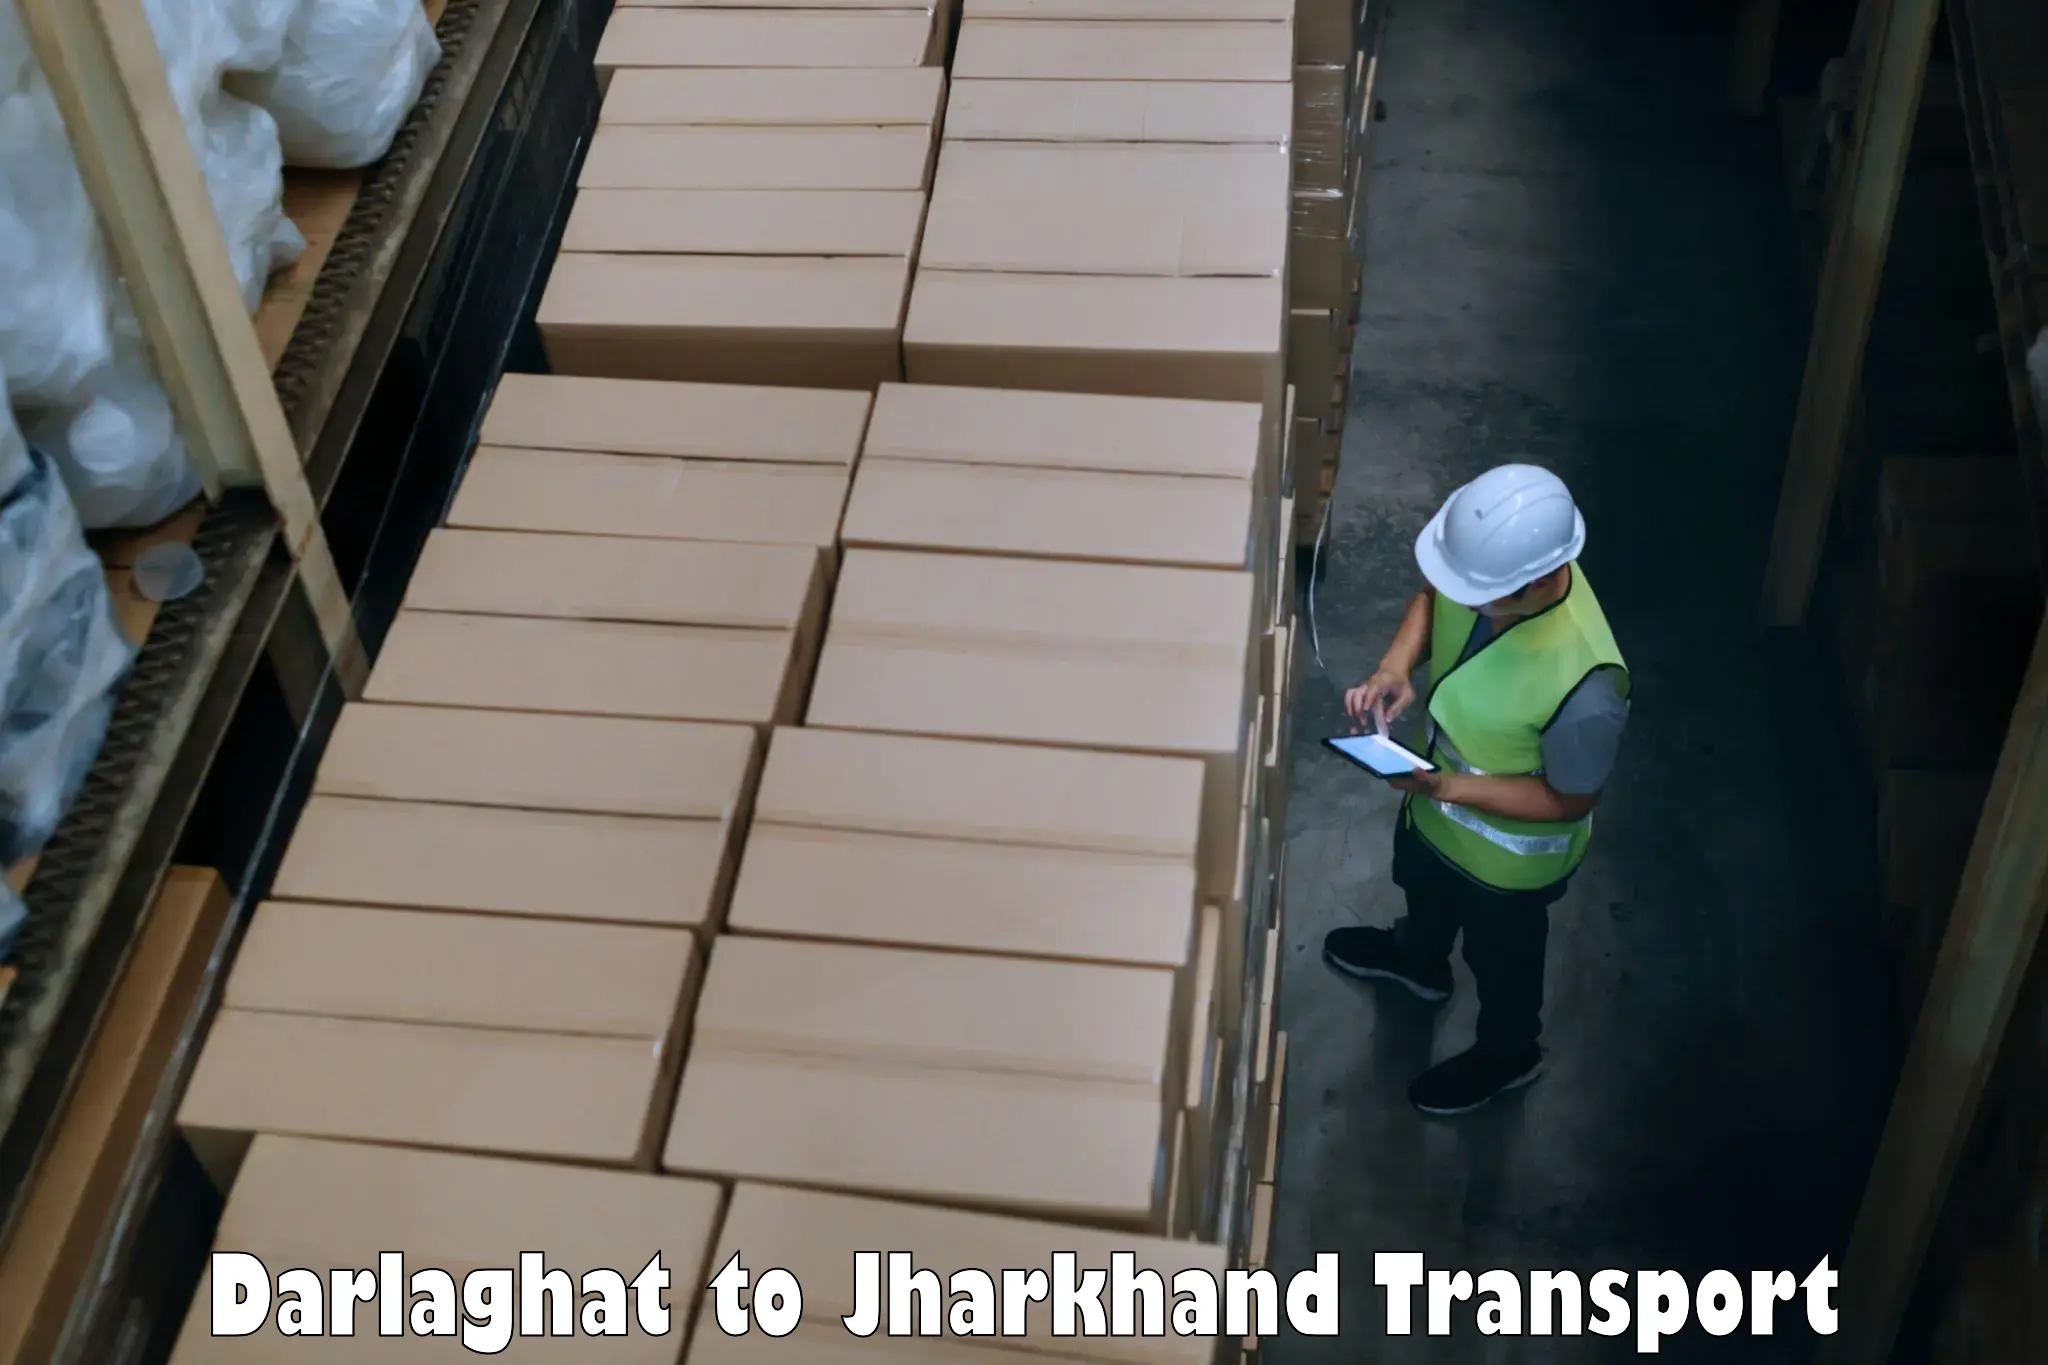 Truck transport companies in India Darlaghat to Barki Saria